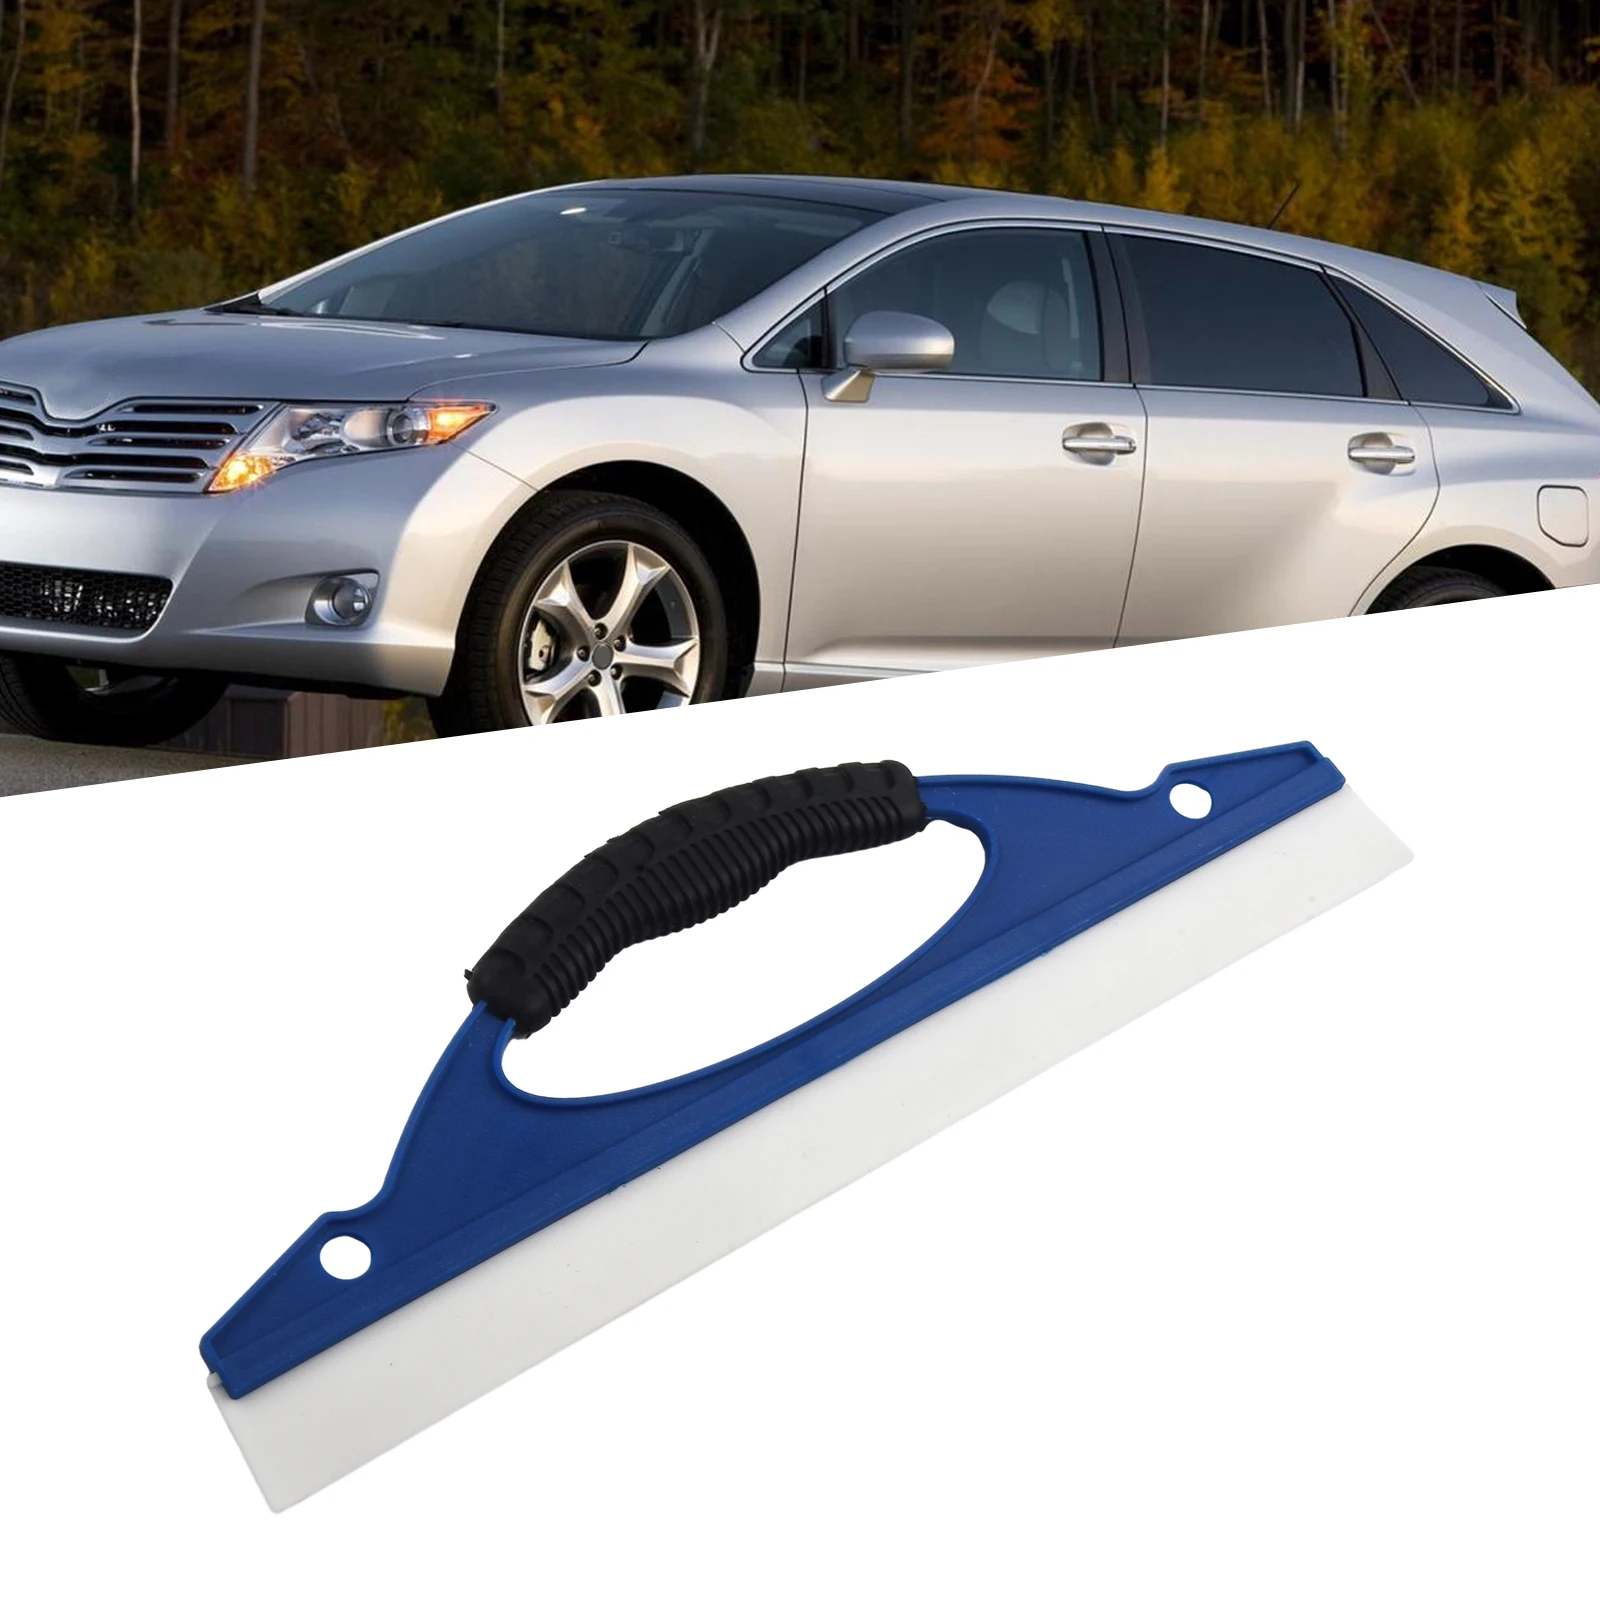 

Car Glass Wiper Squeegee Blade Premium ABS Plastic Anti Rust and Reliable Perfect for Shower Doors and Car Windshields